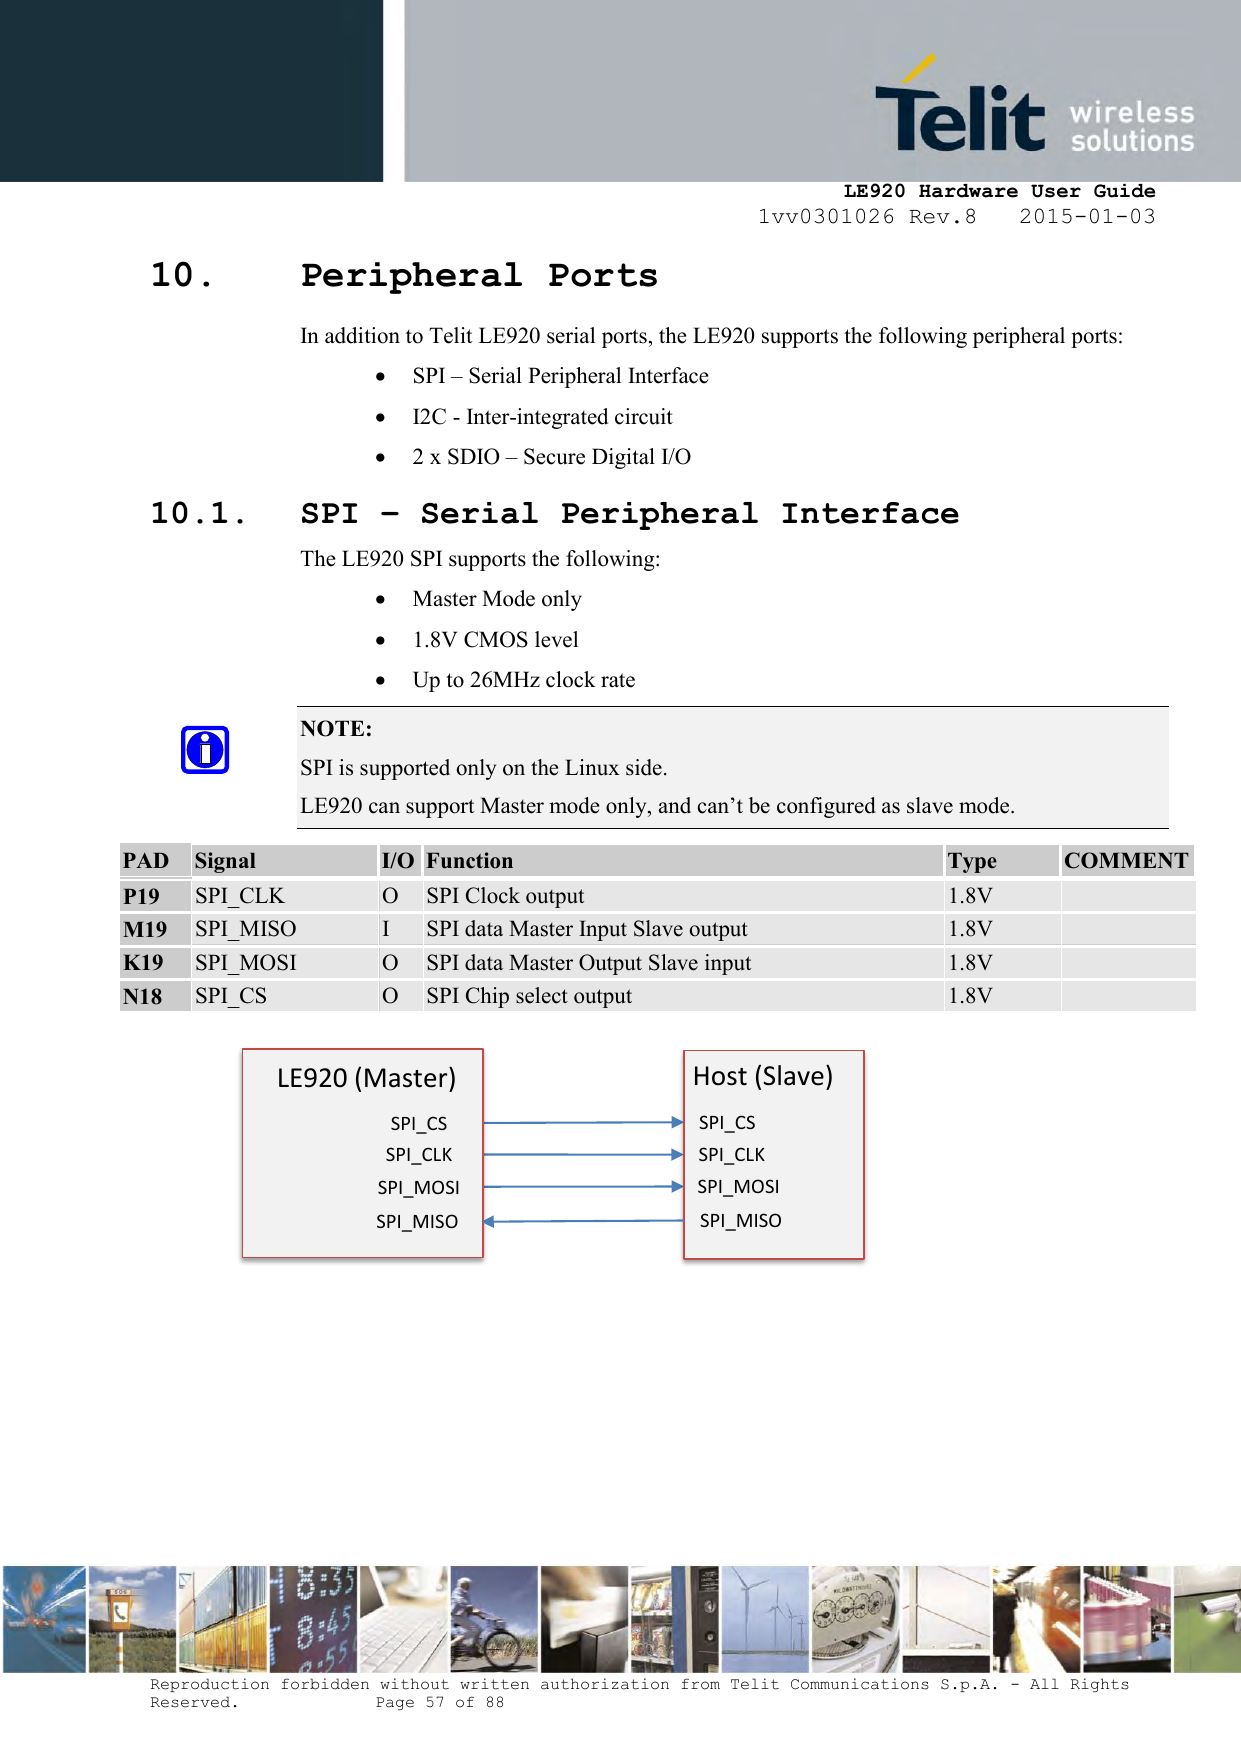     LE920 Hardware User Guide 1vv0301026 Rev.8   2015-01-03 Reproduction forbidden without written authorization from Telit Communications S.p.A. - All Rights Reserved.    Page 57 of 88  10. Peripheral Ports In addition to Telit LE920 serial ports, the LE920 supports the following peripheral ports:  SPI – Serial Peripheral Interface  I2C - Inter-integrated circuit  2 x SDIO – Secure Digital I/O 10.1. SPI – Serial Peripheral Interface The LE920 SPI supports the following:  Master Mode only  1.8V CMOS level  Up to 26MHz clock rate NOTE:  SPI is supported only on the Linux side. LE920 can support Master mode only, and can’t be configured as slave mode. PAD Signal I/O Function Type COMMENT  P19 SPI_CLK O SPI Clock output 1.8V   M19 SPI_MISO I SPI data Master Input Slave output 1.8V   K19 SPI_MOSI O SPI data Master Output Slave input 1.8V   N18 SPI_CS O SPI Chip select output 1.8V            LE920 (Master) SPI_CS SPI_CLK SPI_MOSI SPI_MISO Host (Slave) SPI_CS SPI_CLK SPI_MOSI  SPI_MISO 